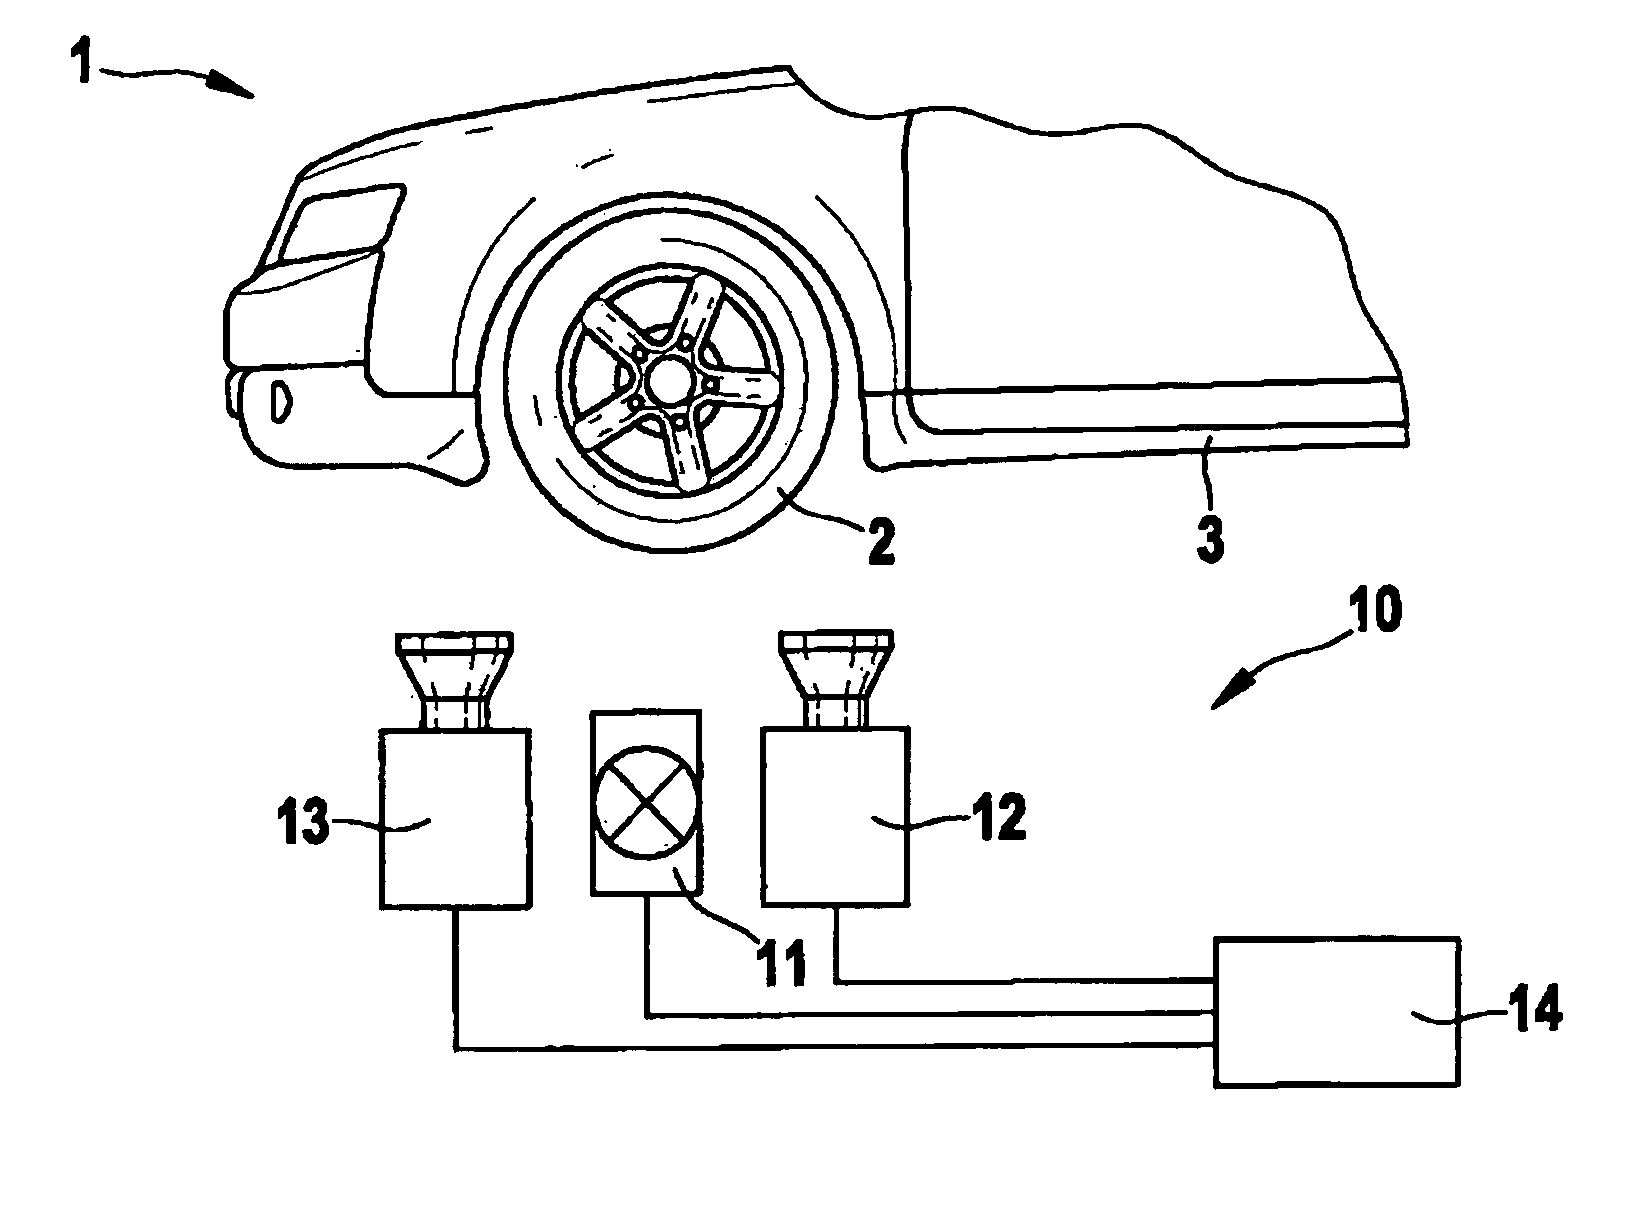 Method for ascertaining the axis of rotation of a vehicle wheel